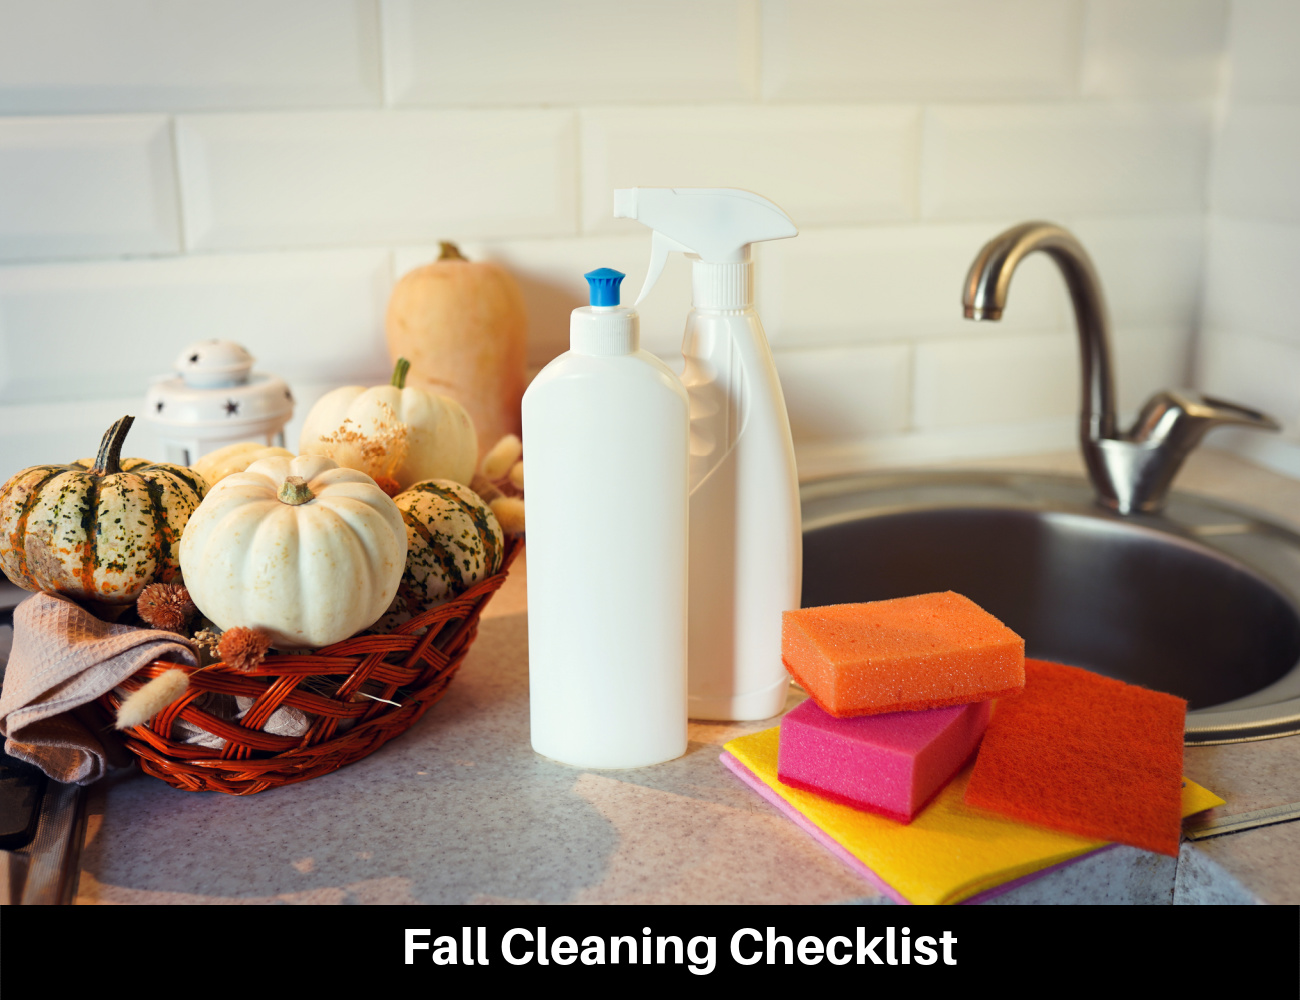 Follow This Fall Cleaning Checklist for Every Room